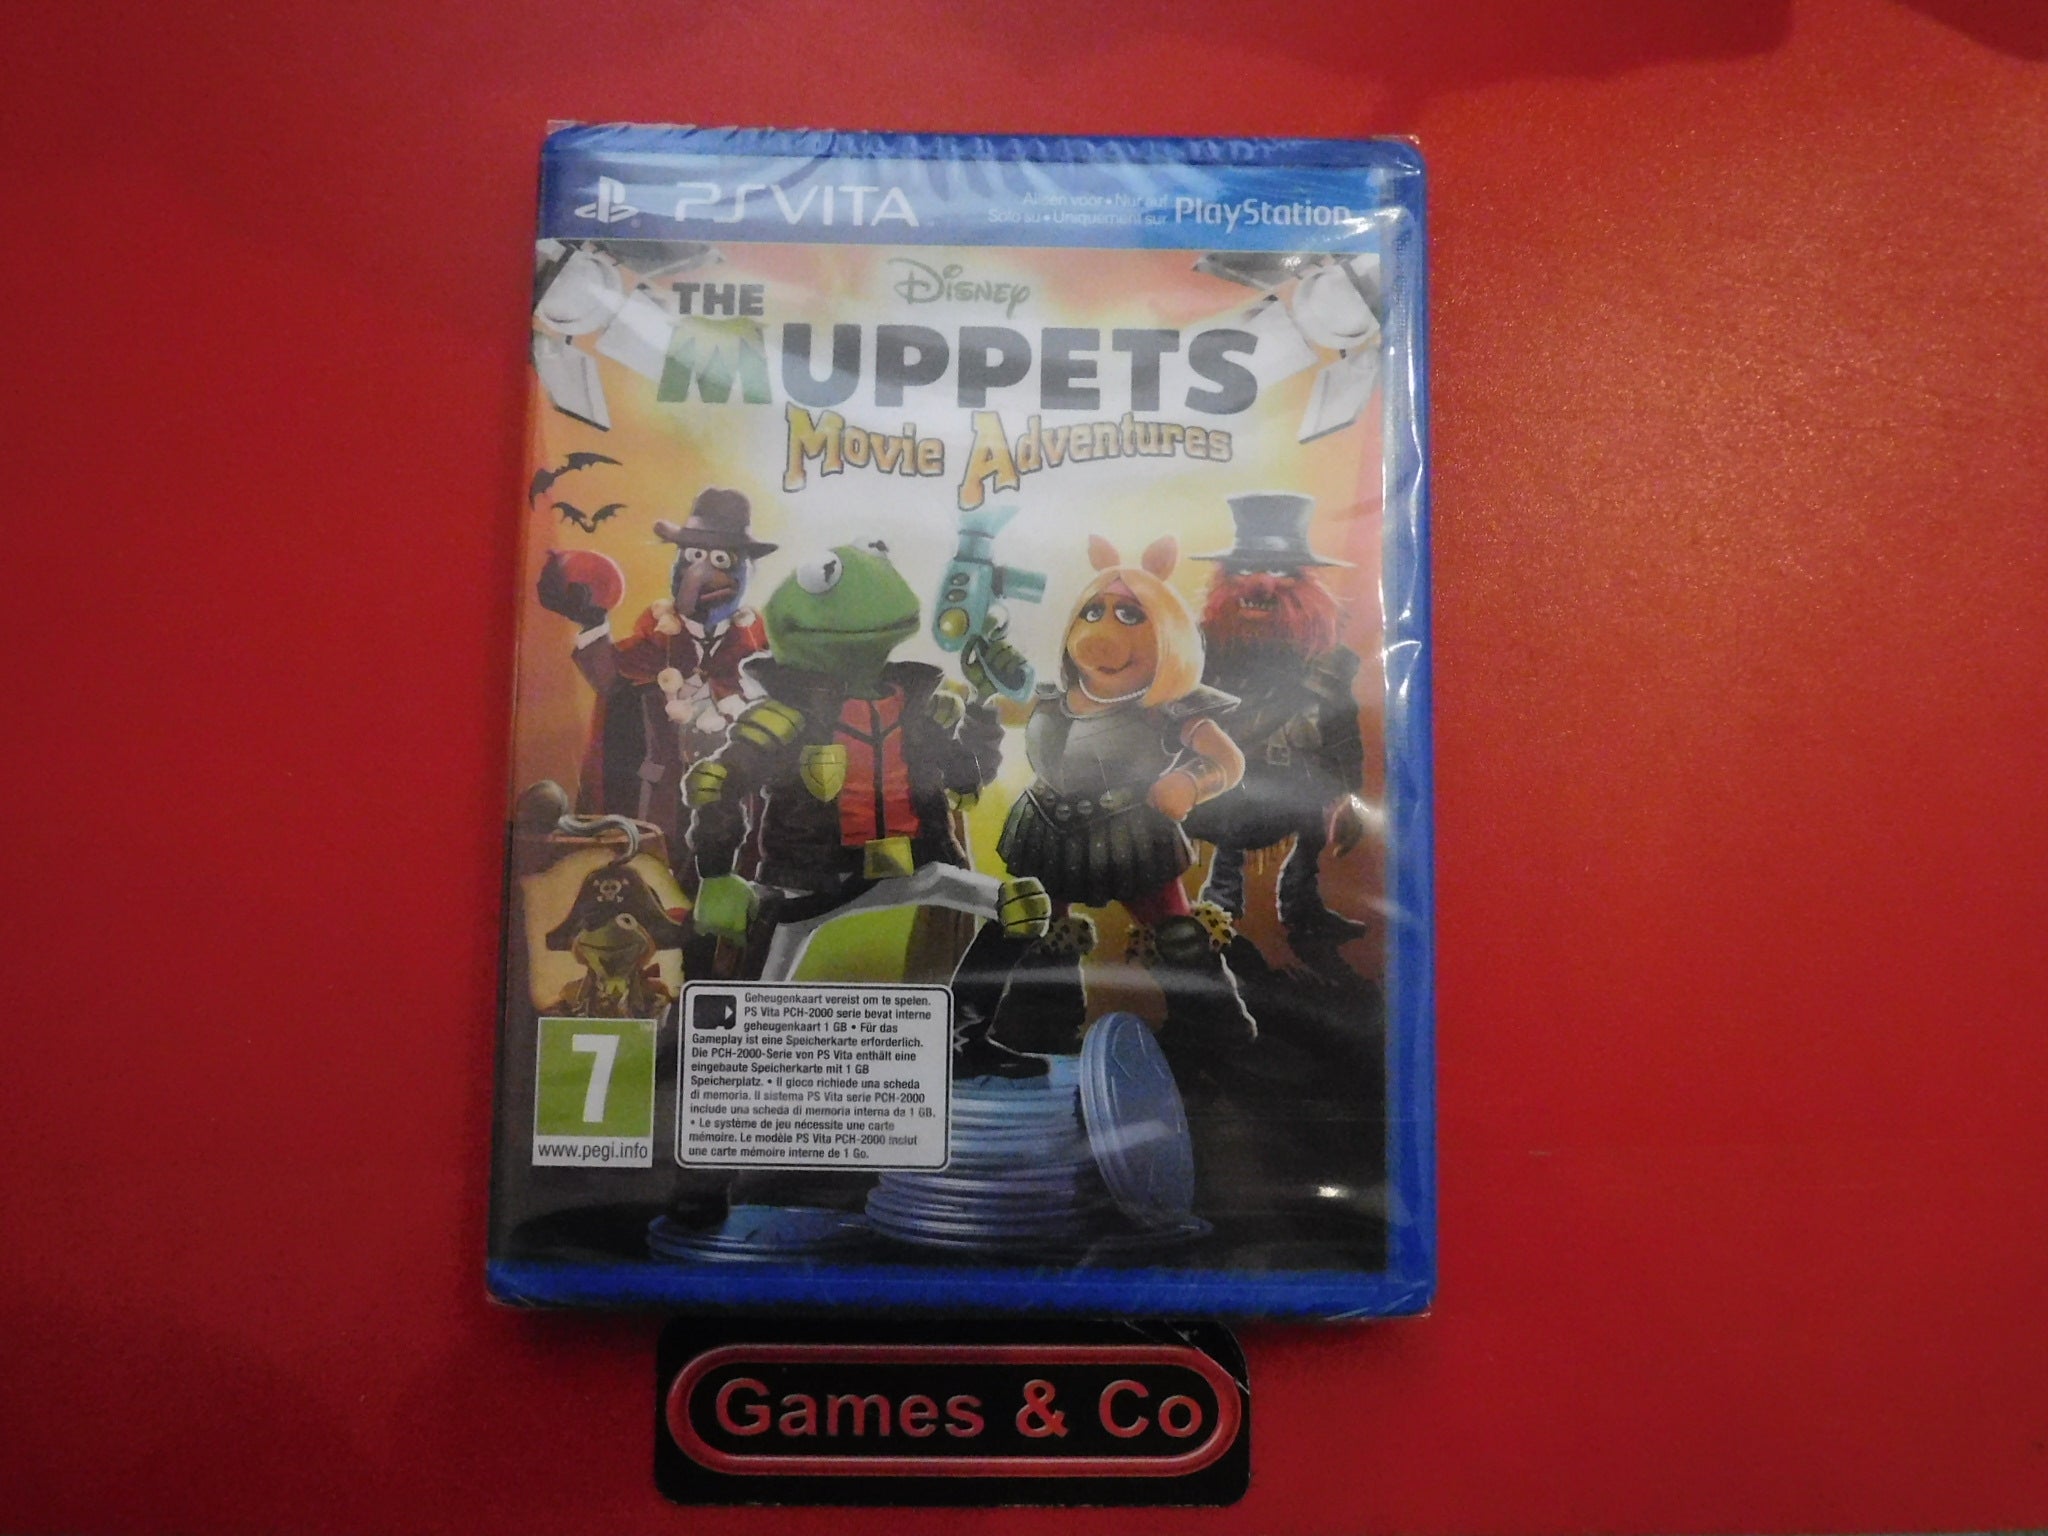 THE MUPPETS MOVIE ADVENTURES